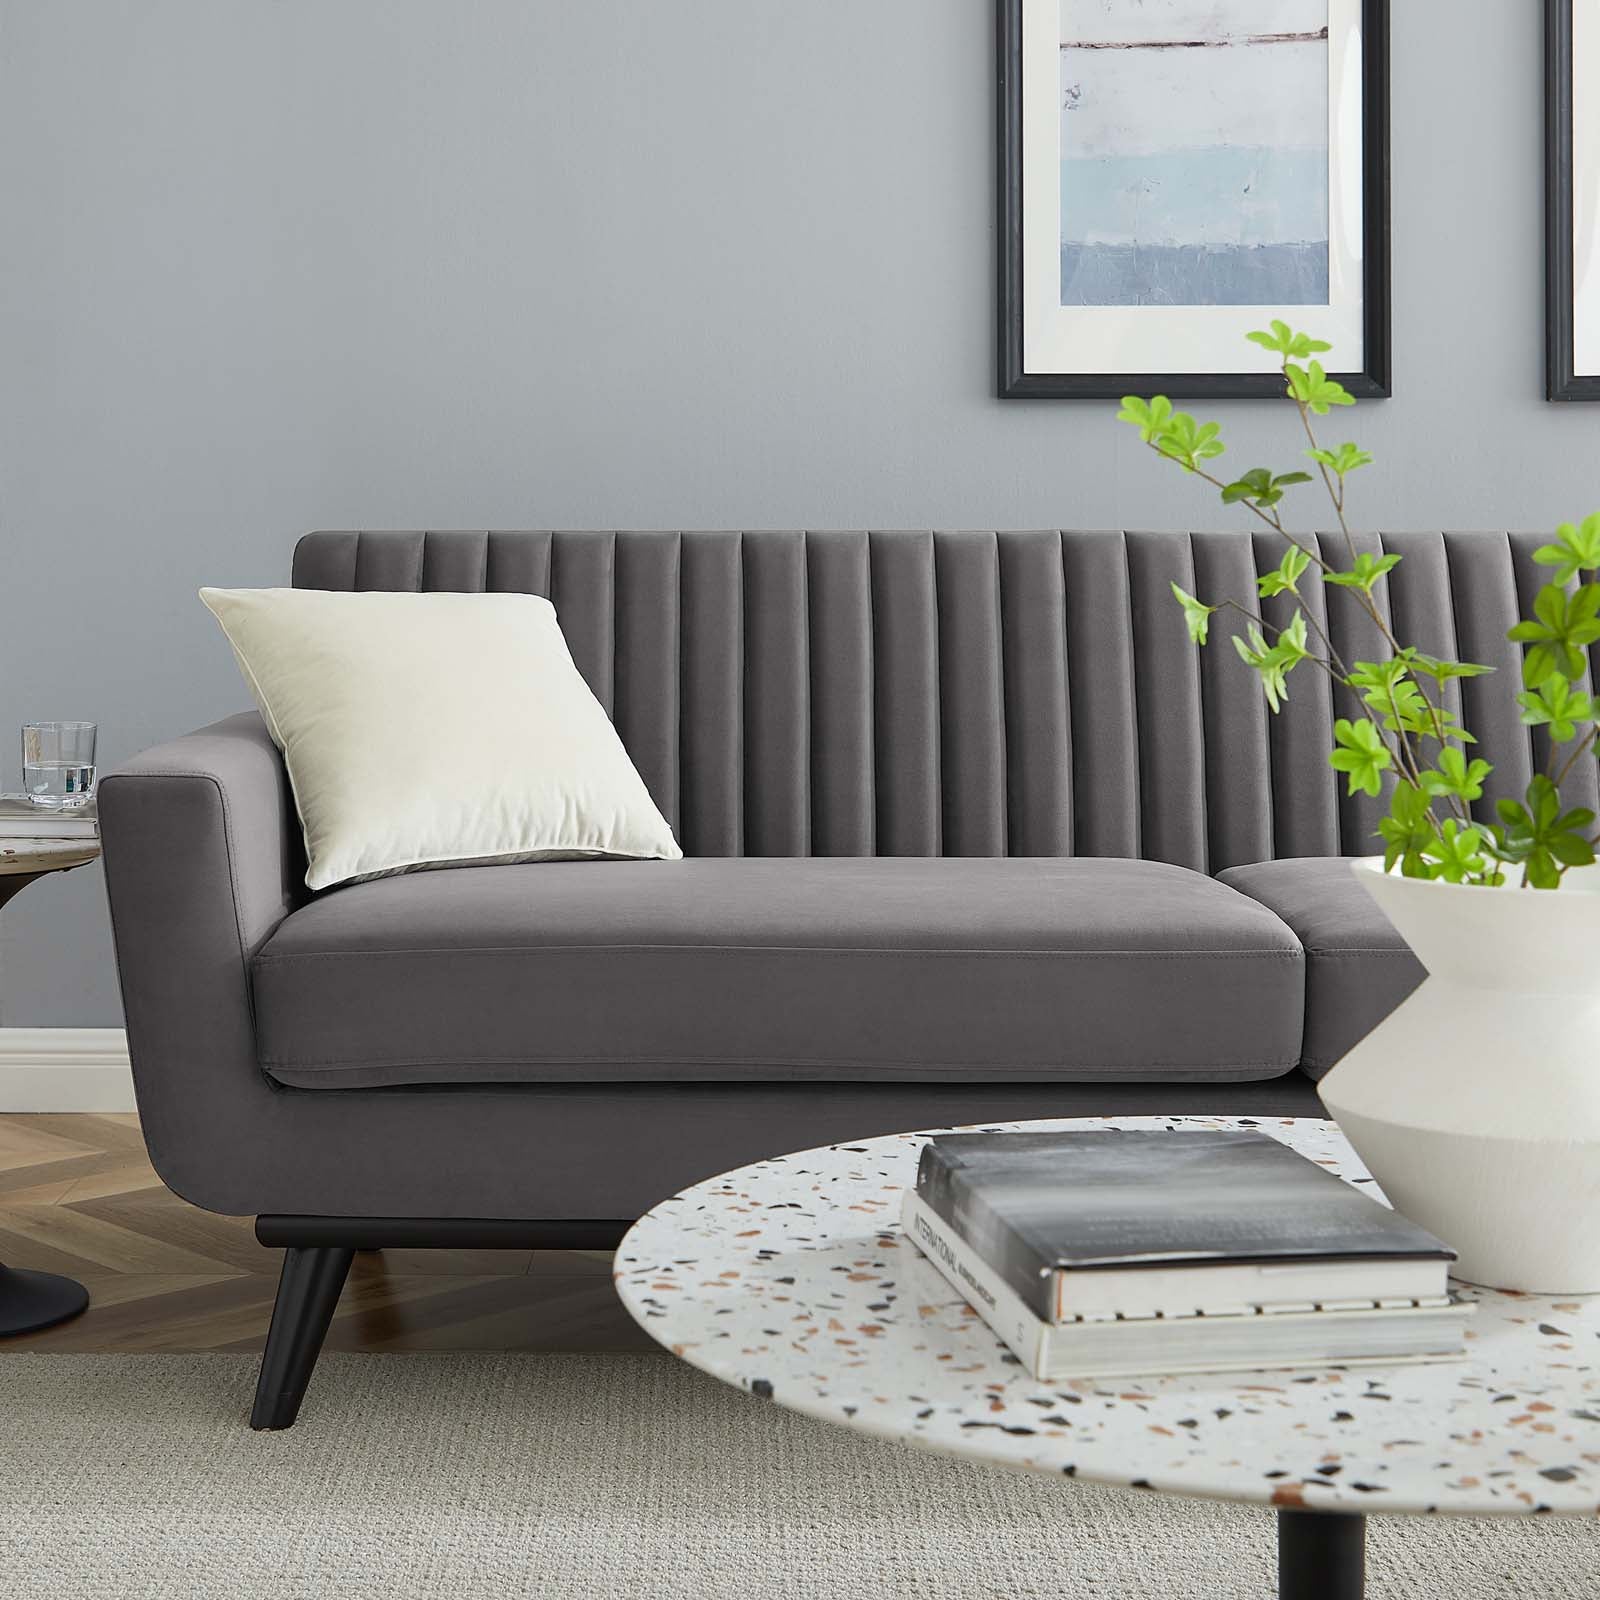 Modway Sofas & Couches - Engage Channel Tufted Performance Velvet Sofa Gray